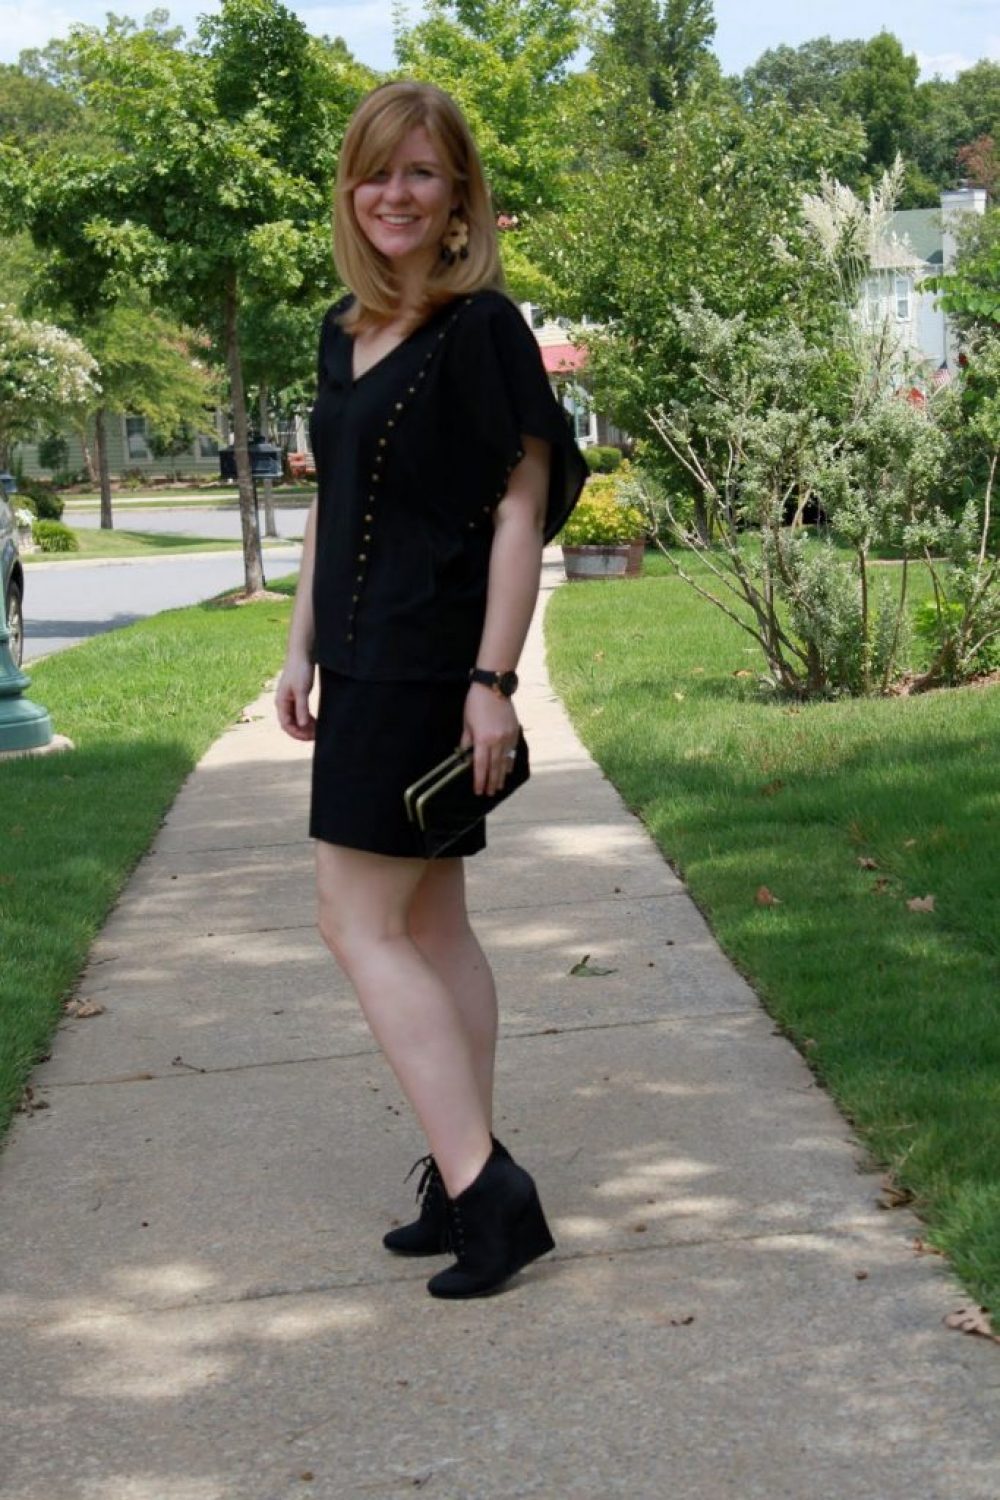 How I Wore My Heels…On the Town